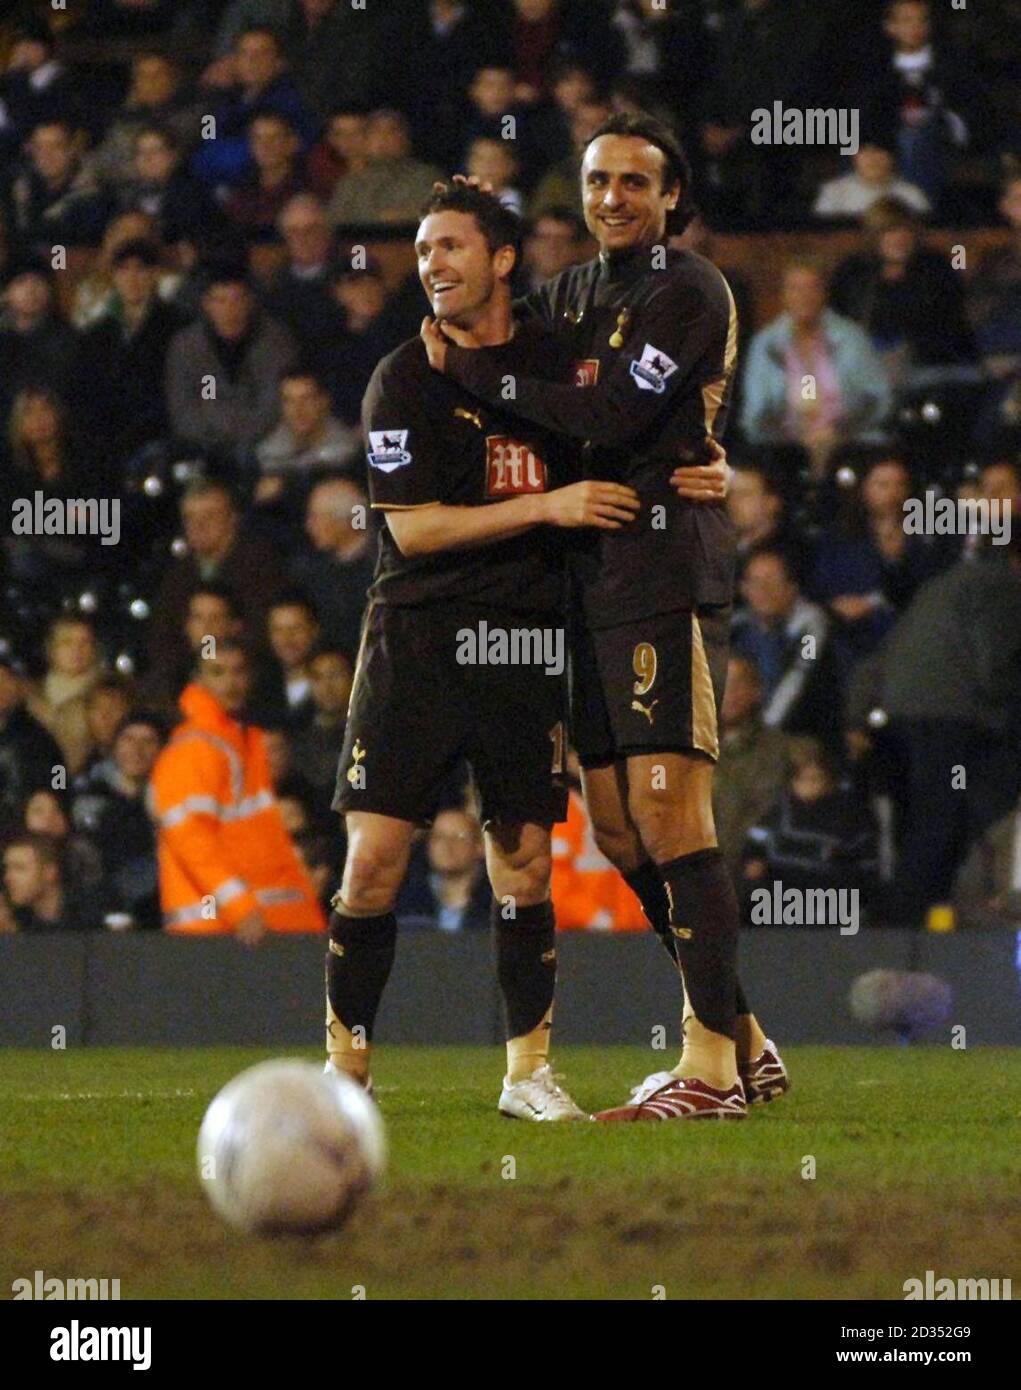 Tottenham Hotspur's double goalscorers Robbie Keane (left) and Dimitar Berbatov celebrate during the FA Cup Fifth Round match against Fulham at Craven Cottage, London, Stock Photo